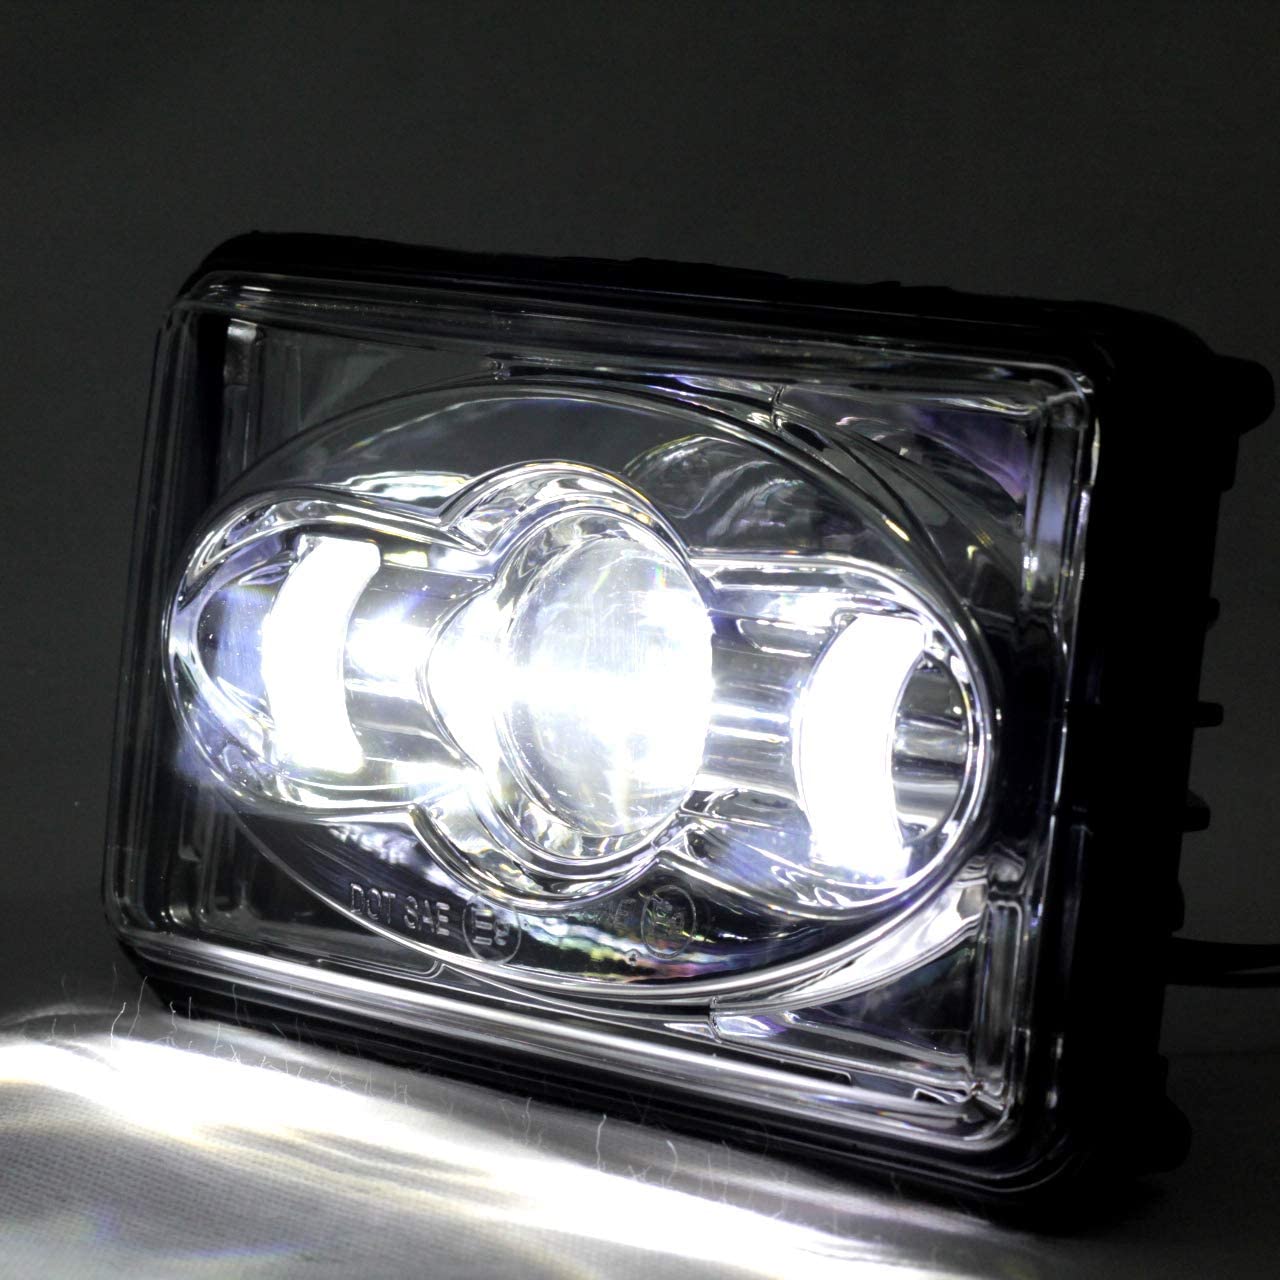 Eagle Lights Chrome 4 x 6 Chrome LED Headlights - Four Pack (Two High Beam / Two Low Beam)